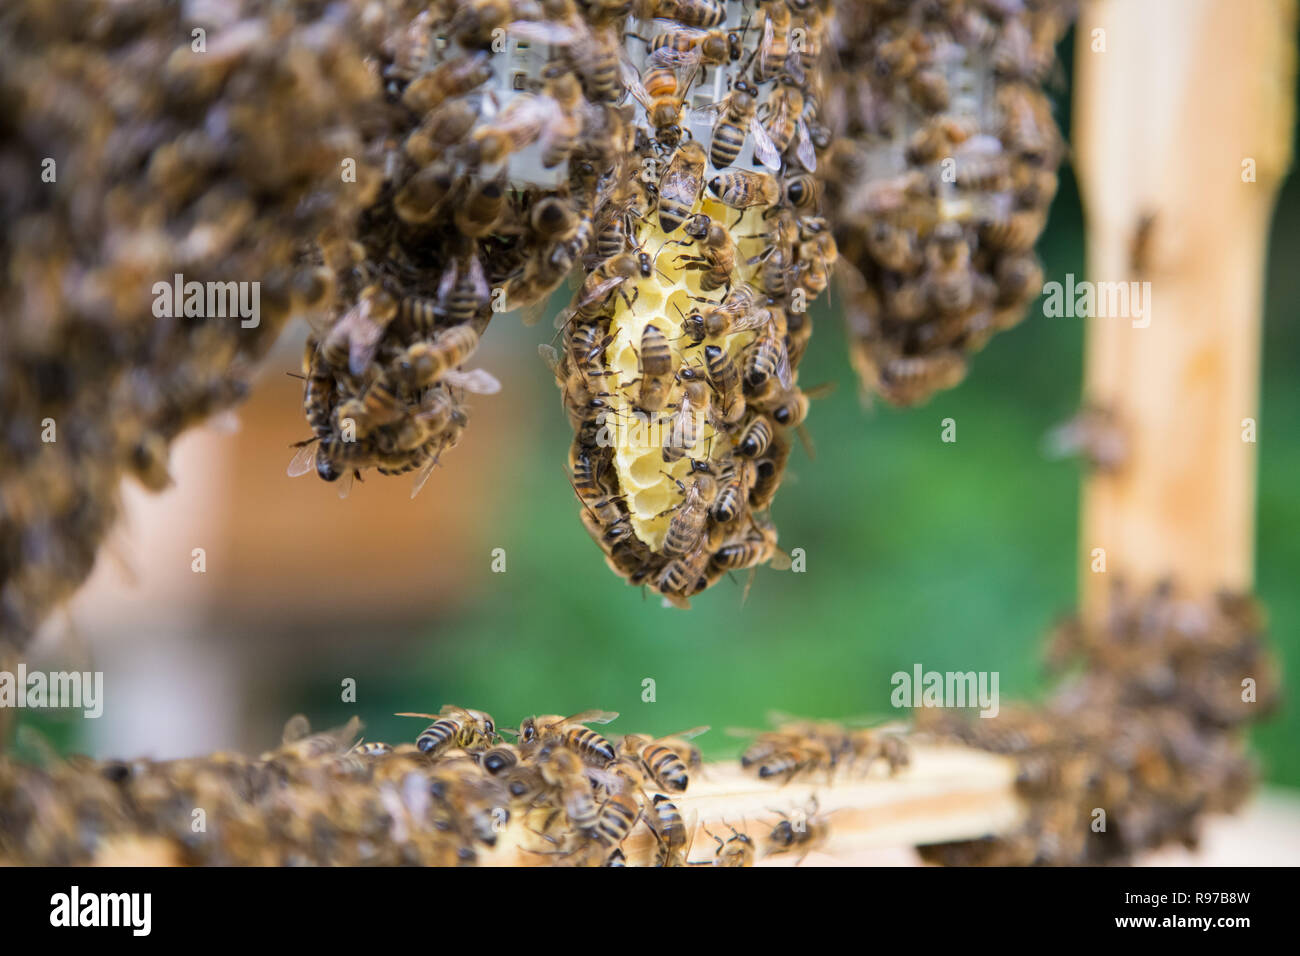 Bee Keep High Resolution Stock Photography and Images - Alamy